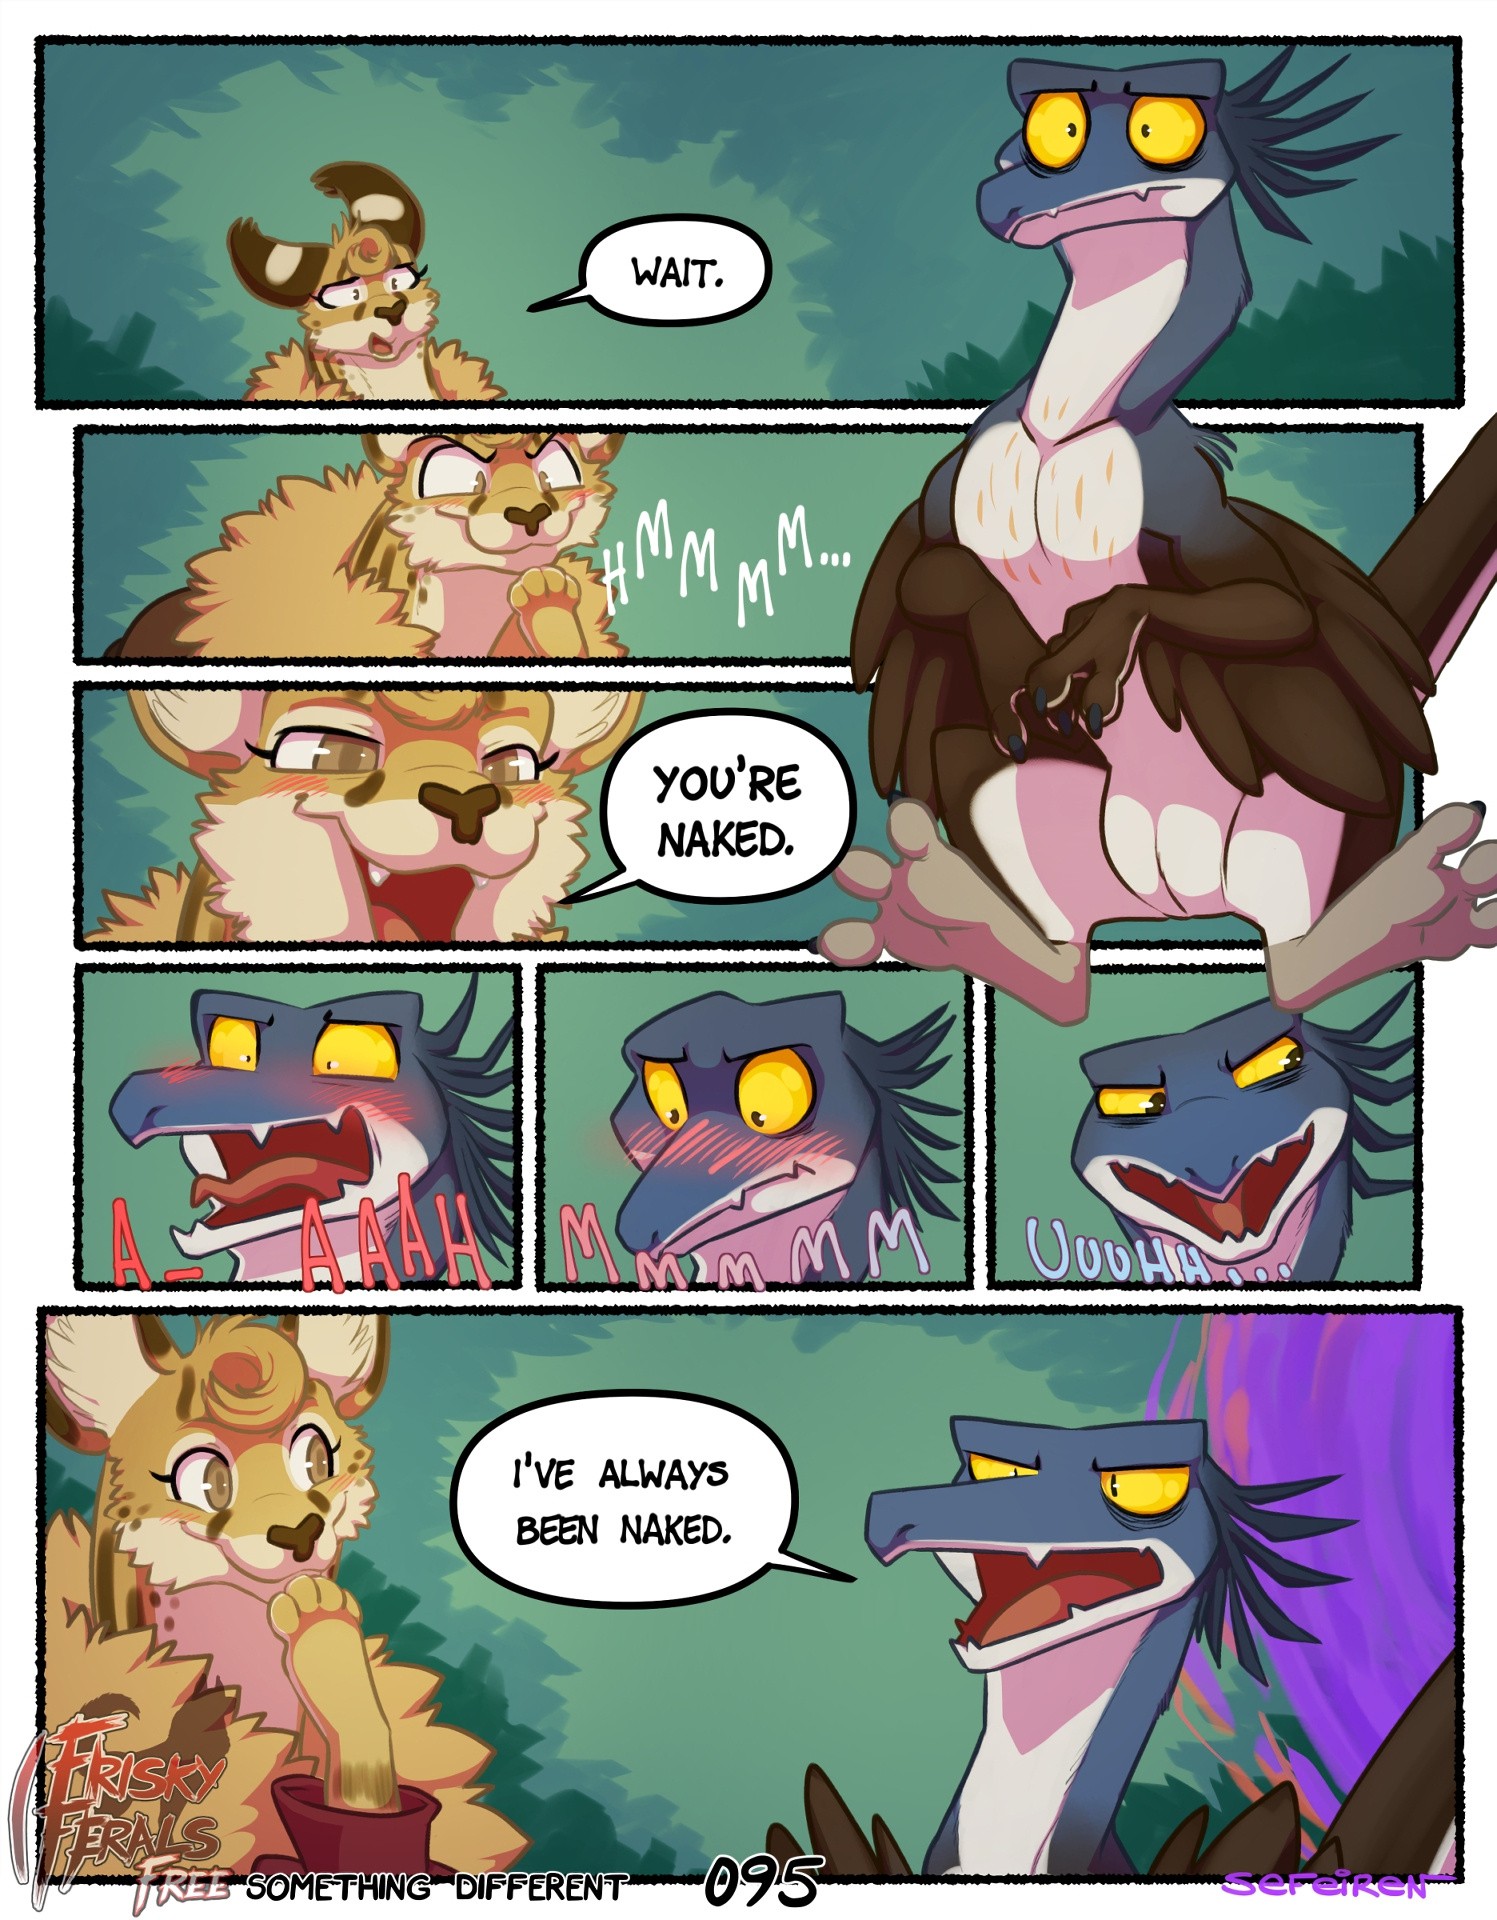 Frisky Ferals - Something Different porn comic picture 95